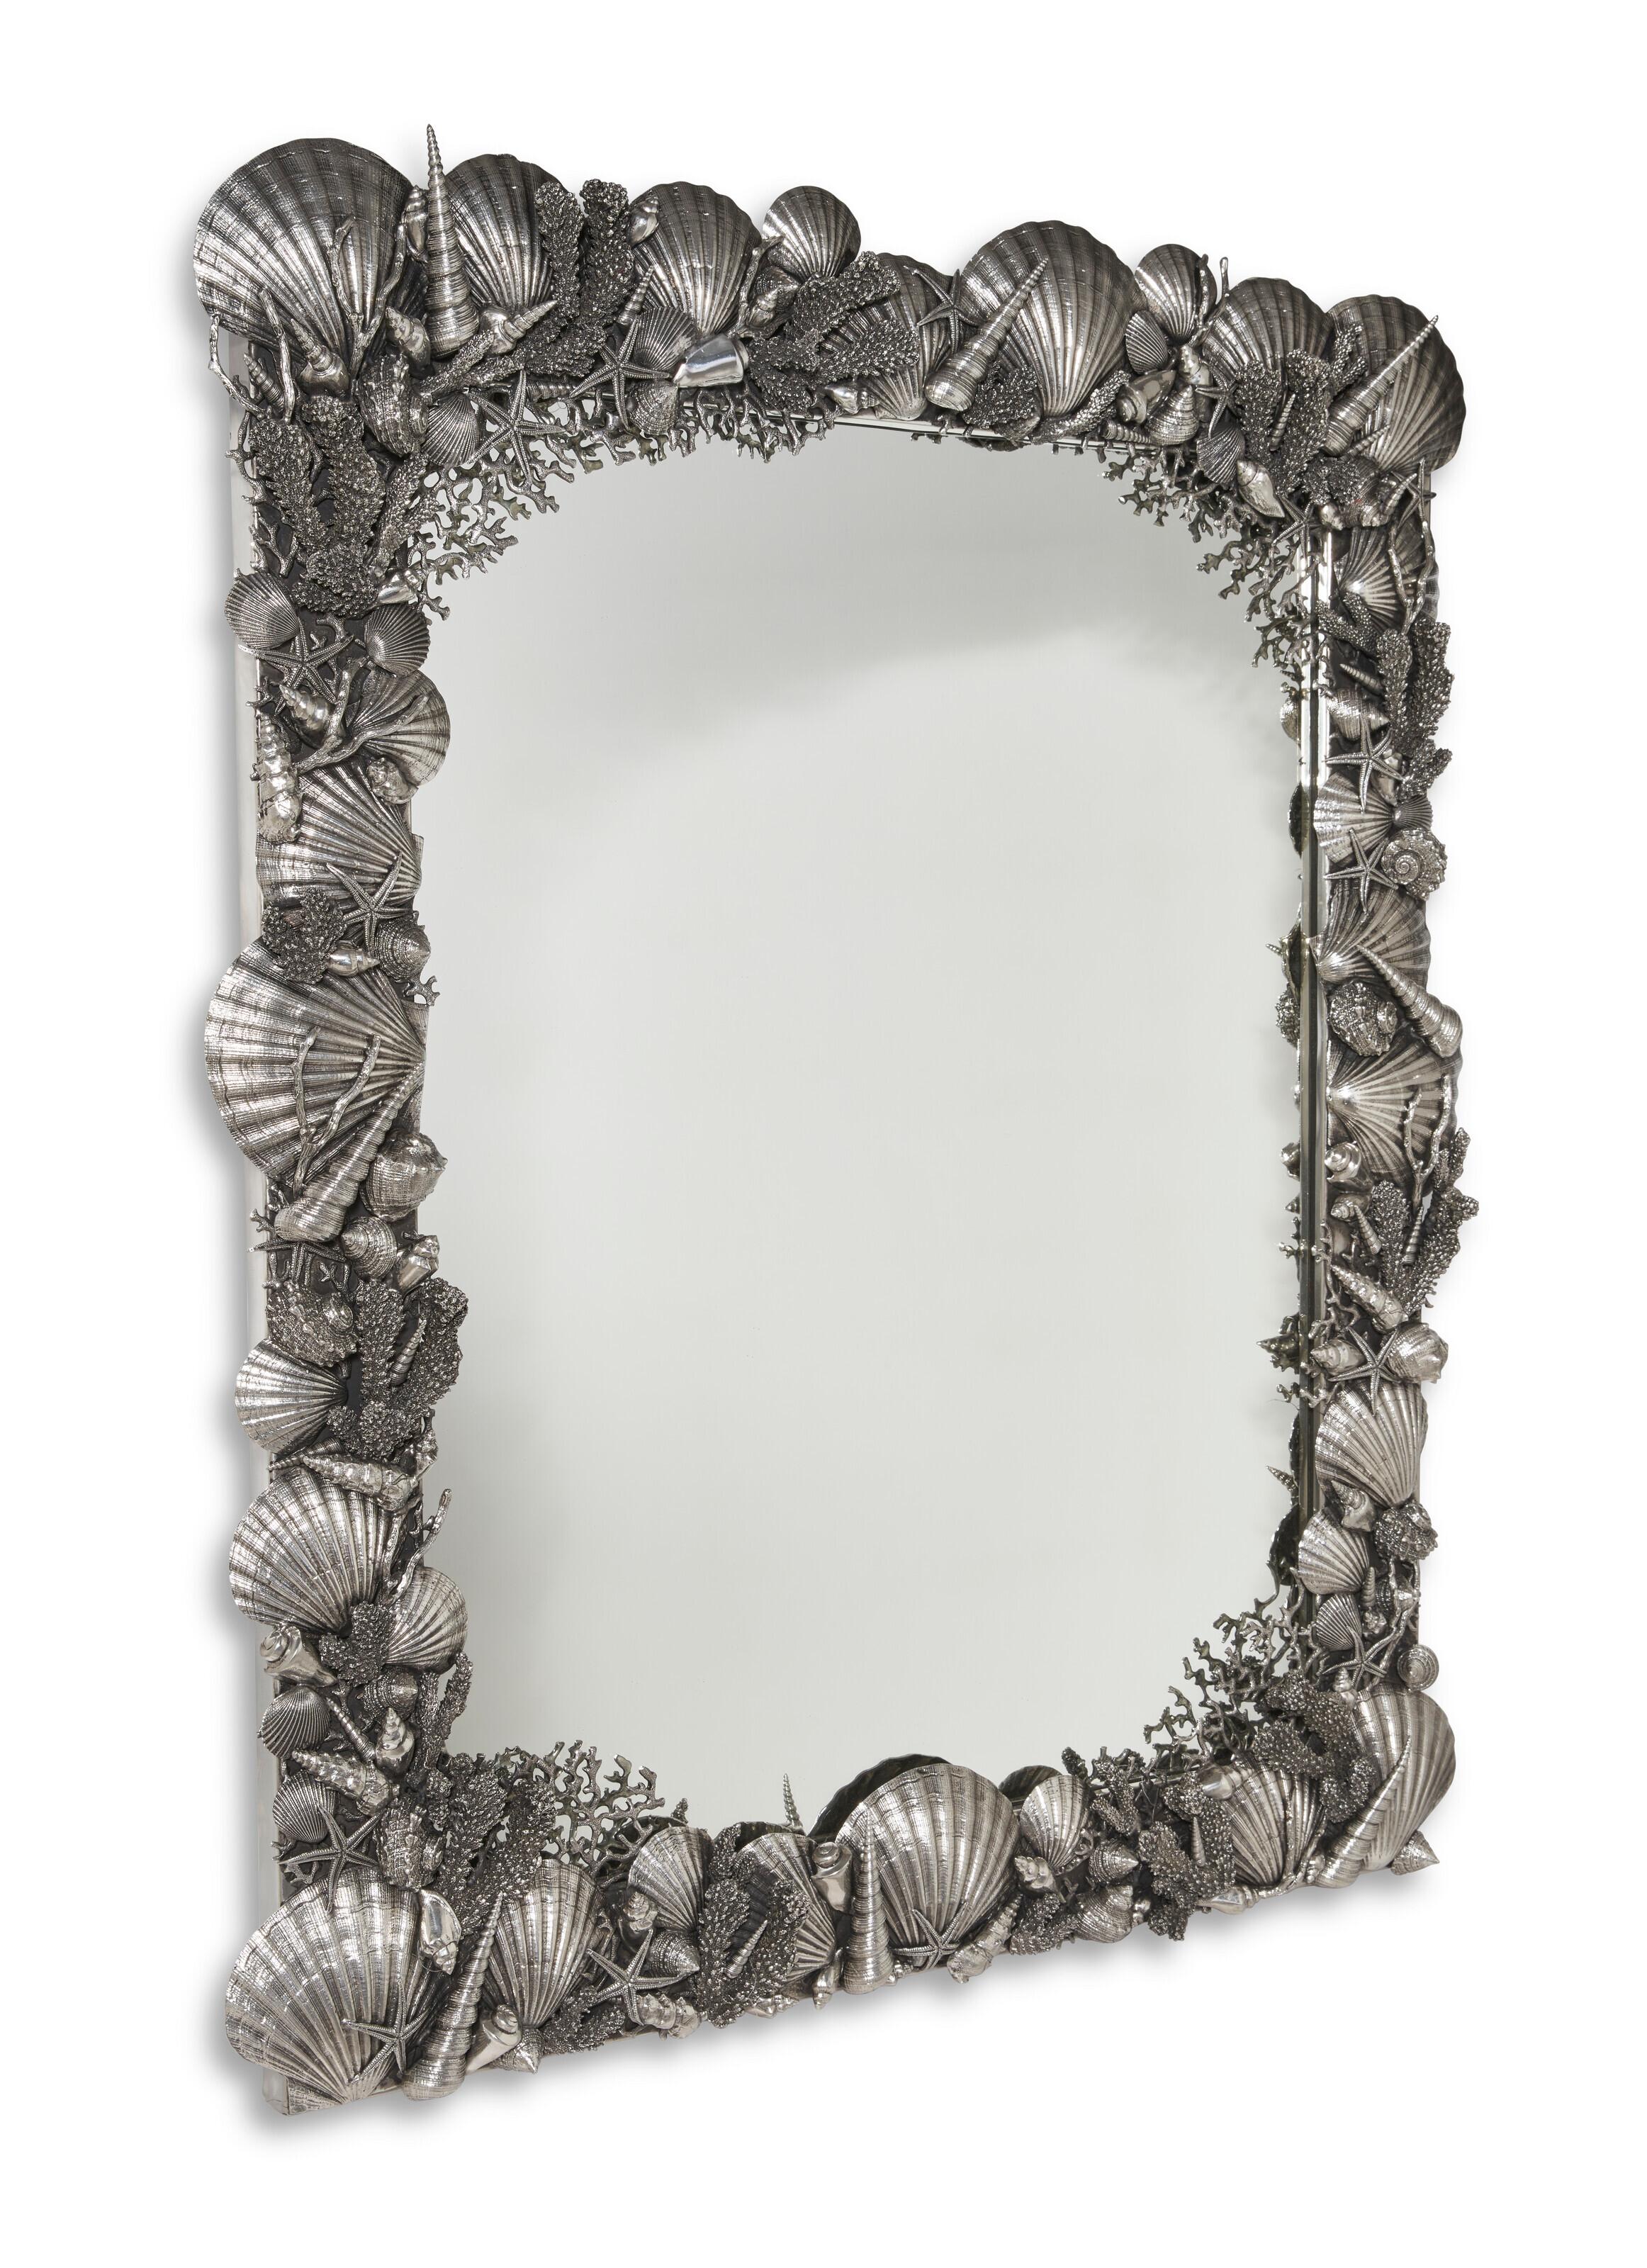 Our pair of vintage Italian made mirror with finely sculpted frame of three-dimensional sea shells each measure 34 1/2 by 41 inches and are in excellent condition.  Ideal for use as pier mirrors or to frame doorways.